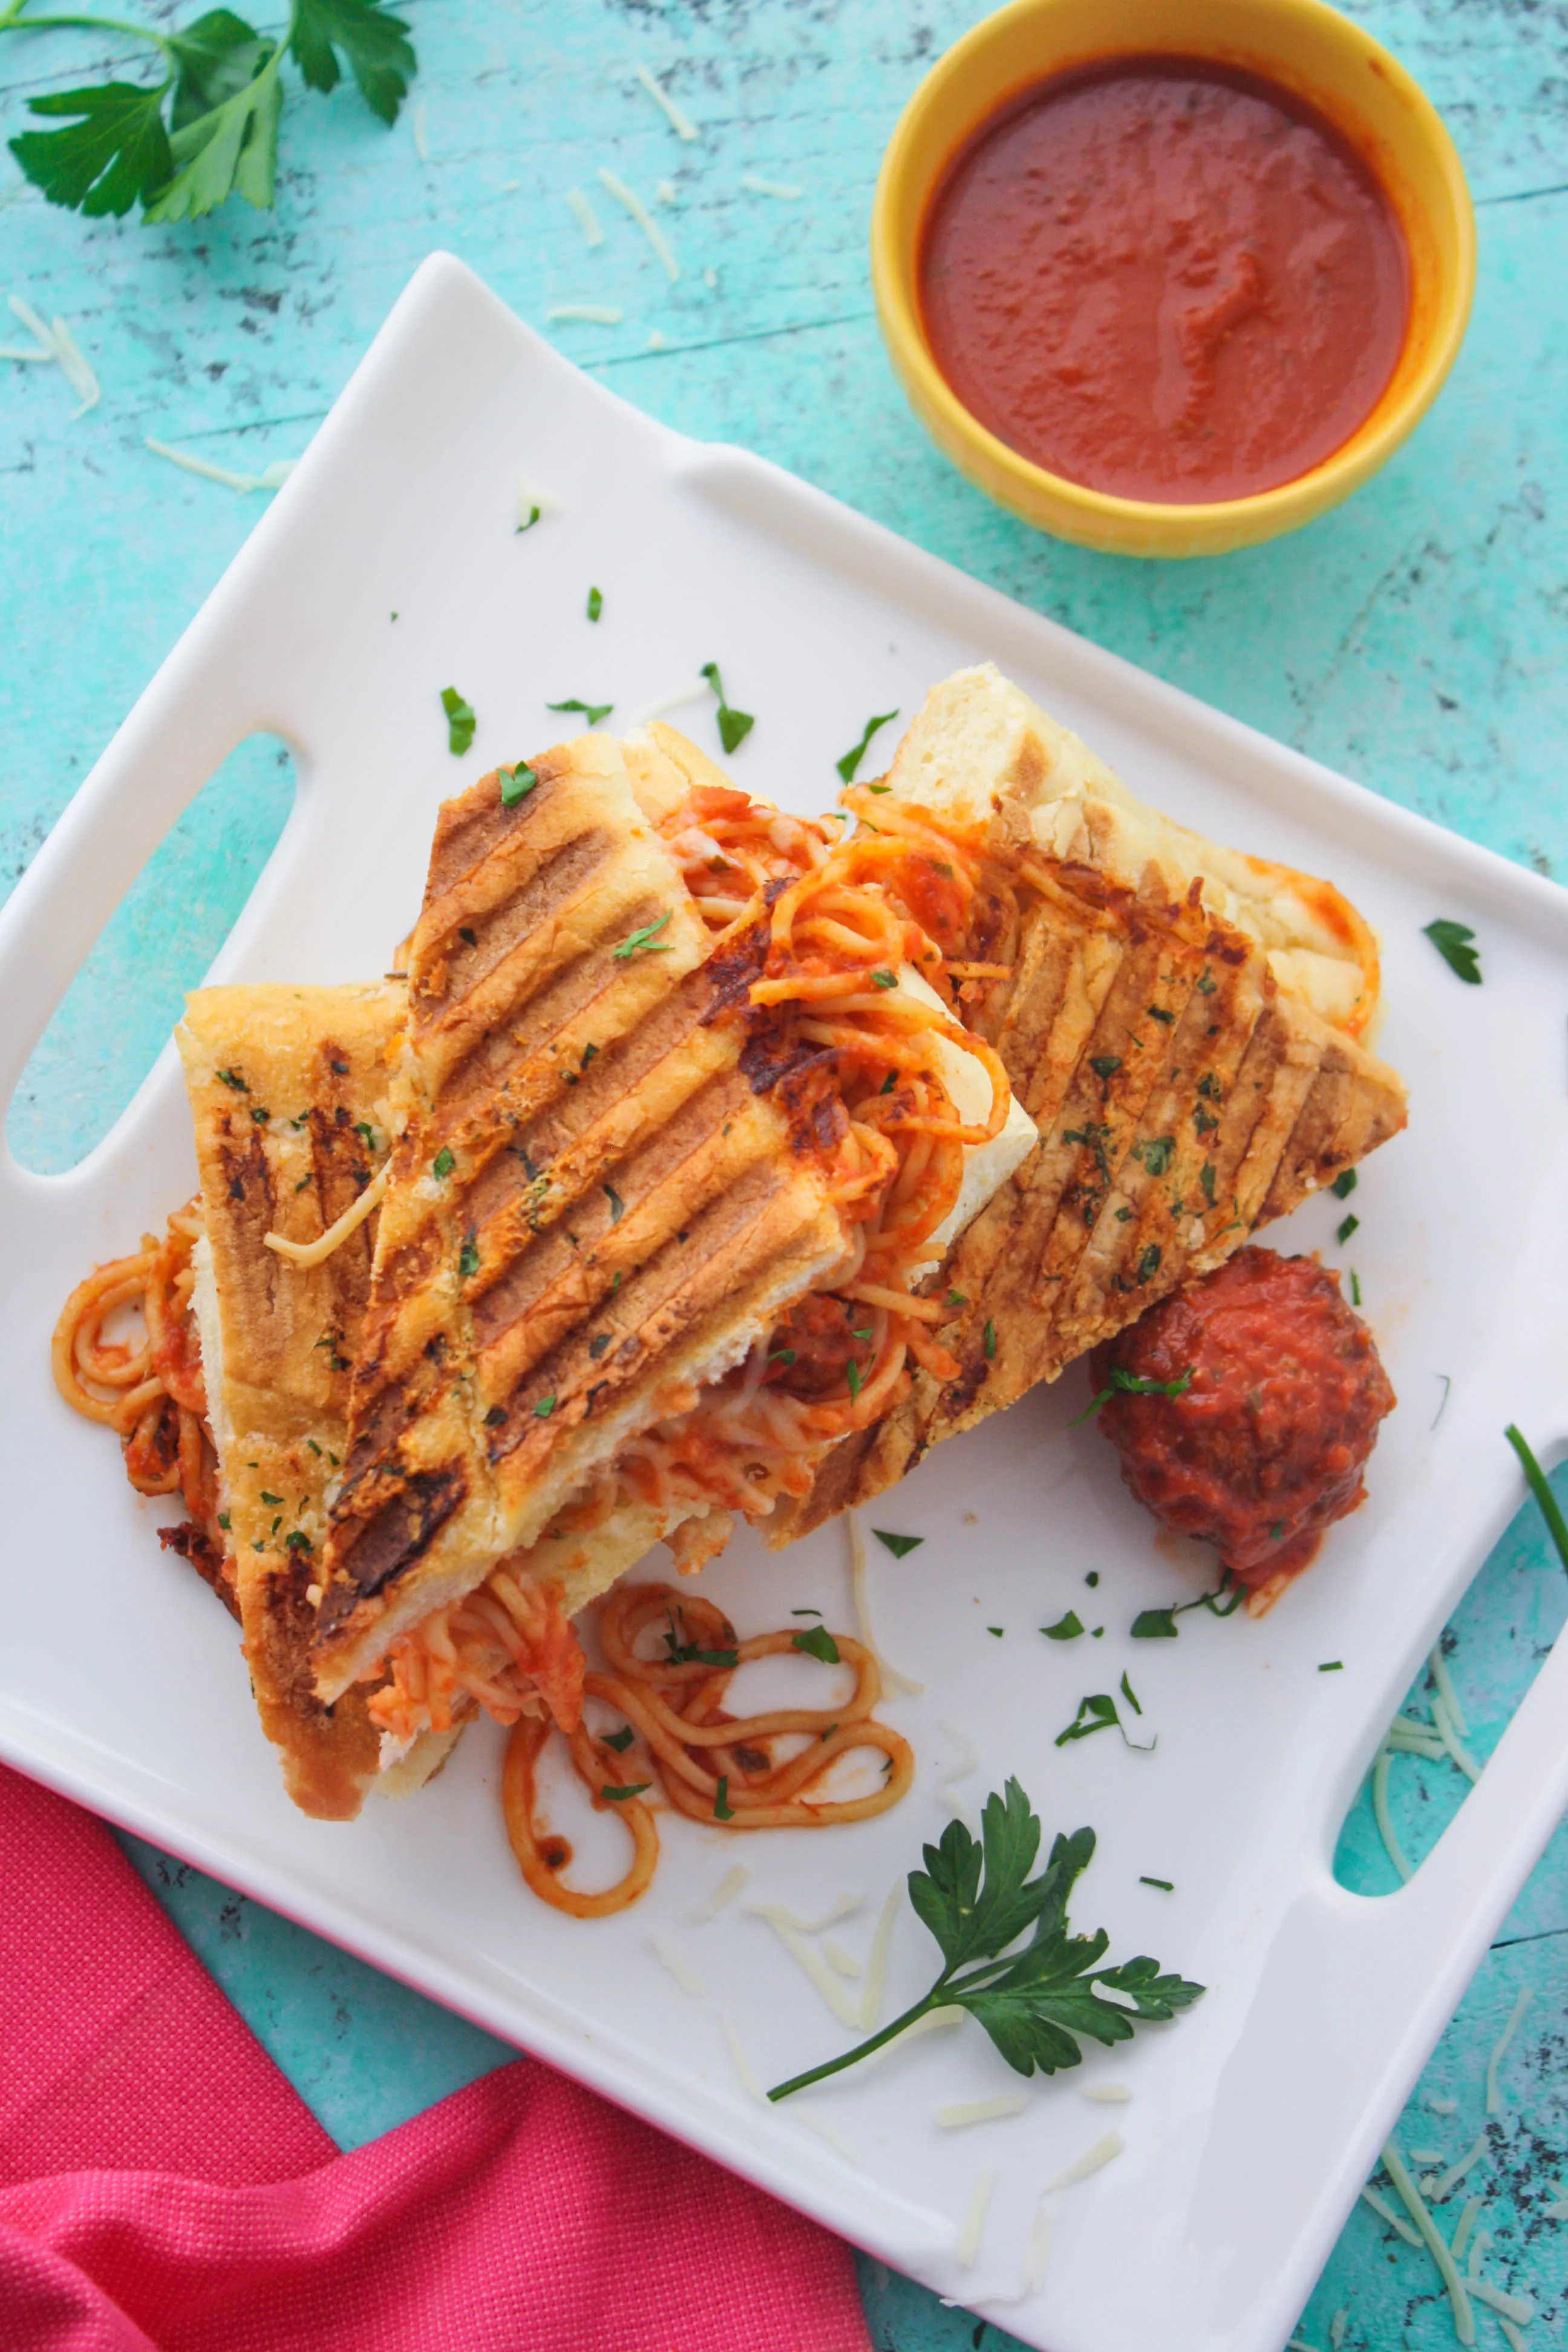 Leftover Spaghetti & Meatball Panini is a fun dish the whole family will enjoy! Leftovers get a fun makeover, for sure!